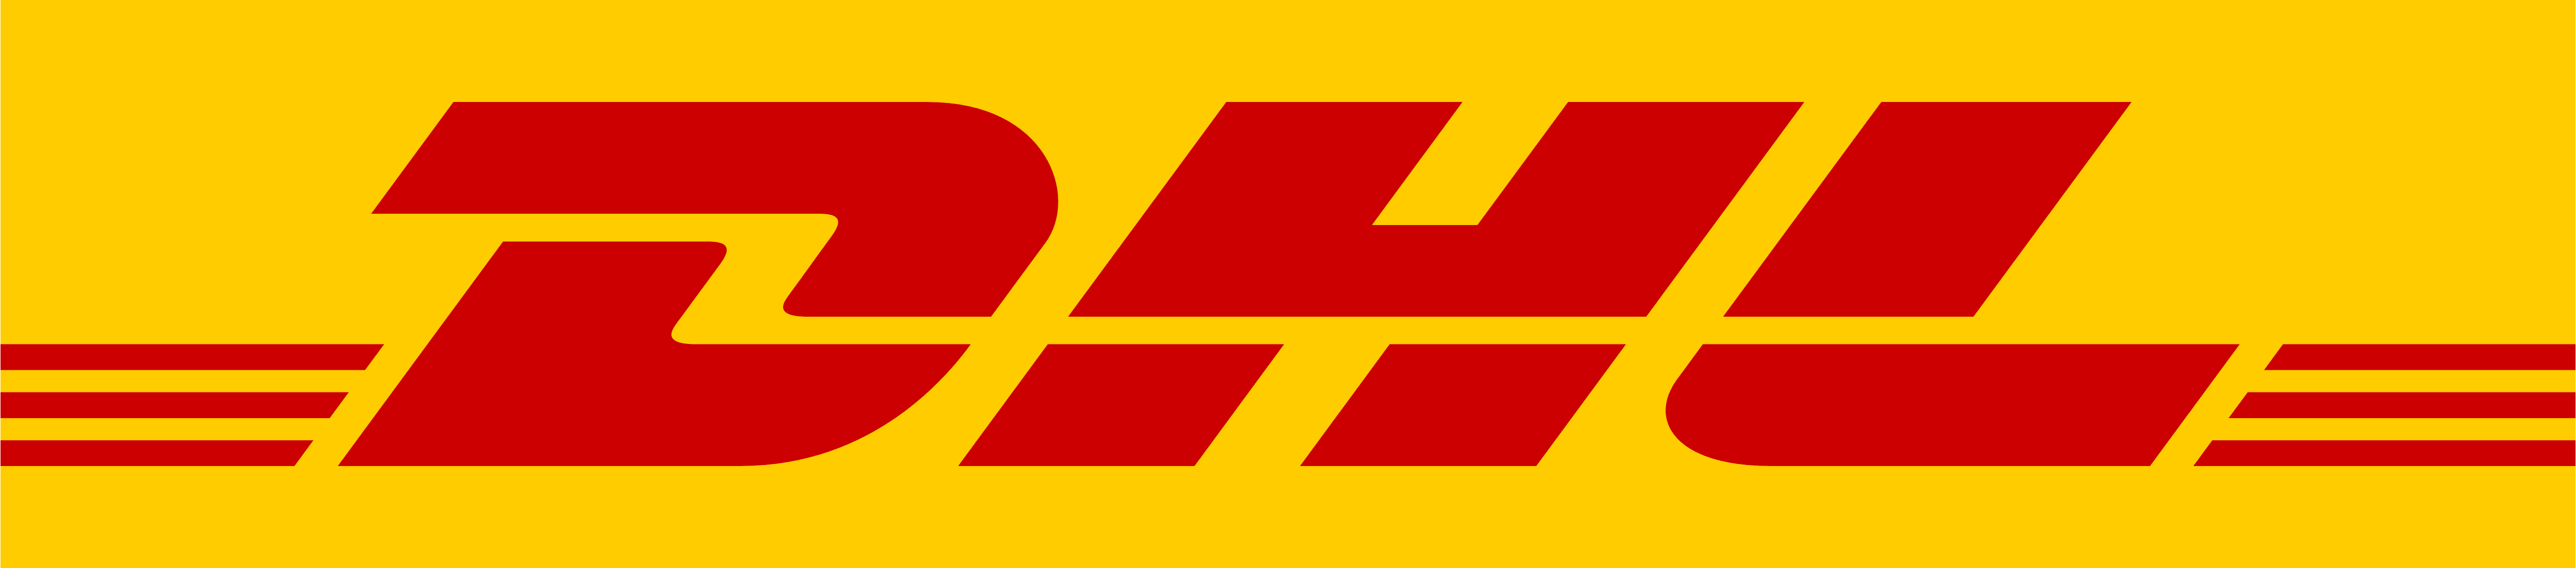 Dhl Logo / Easy and quickly international shipping DHL Express